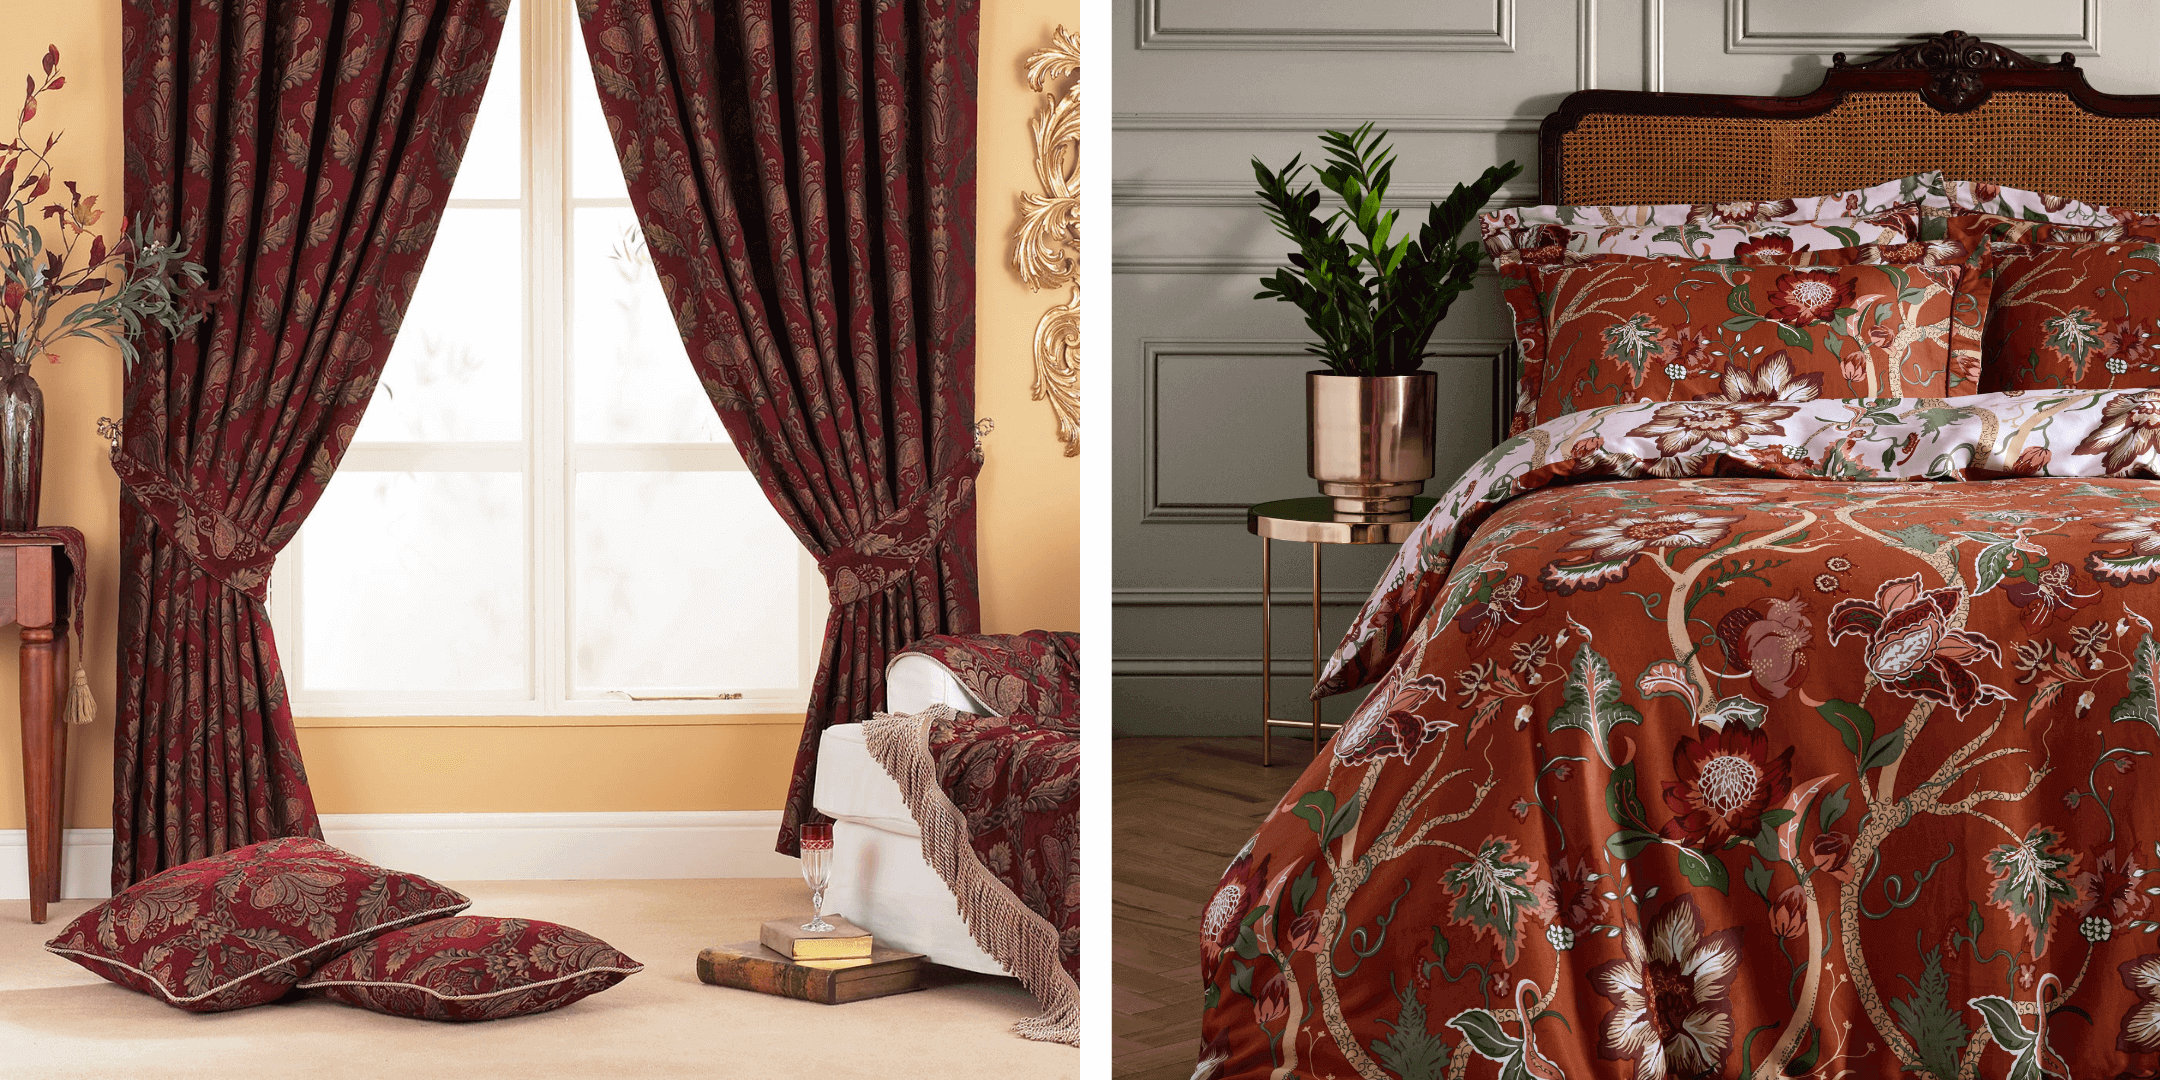 an image of a pair of traditional style red jacquard curtains next to an image of a wooden bed with a red bedding set